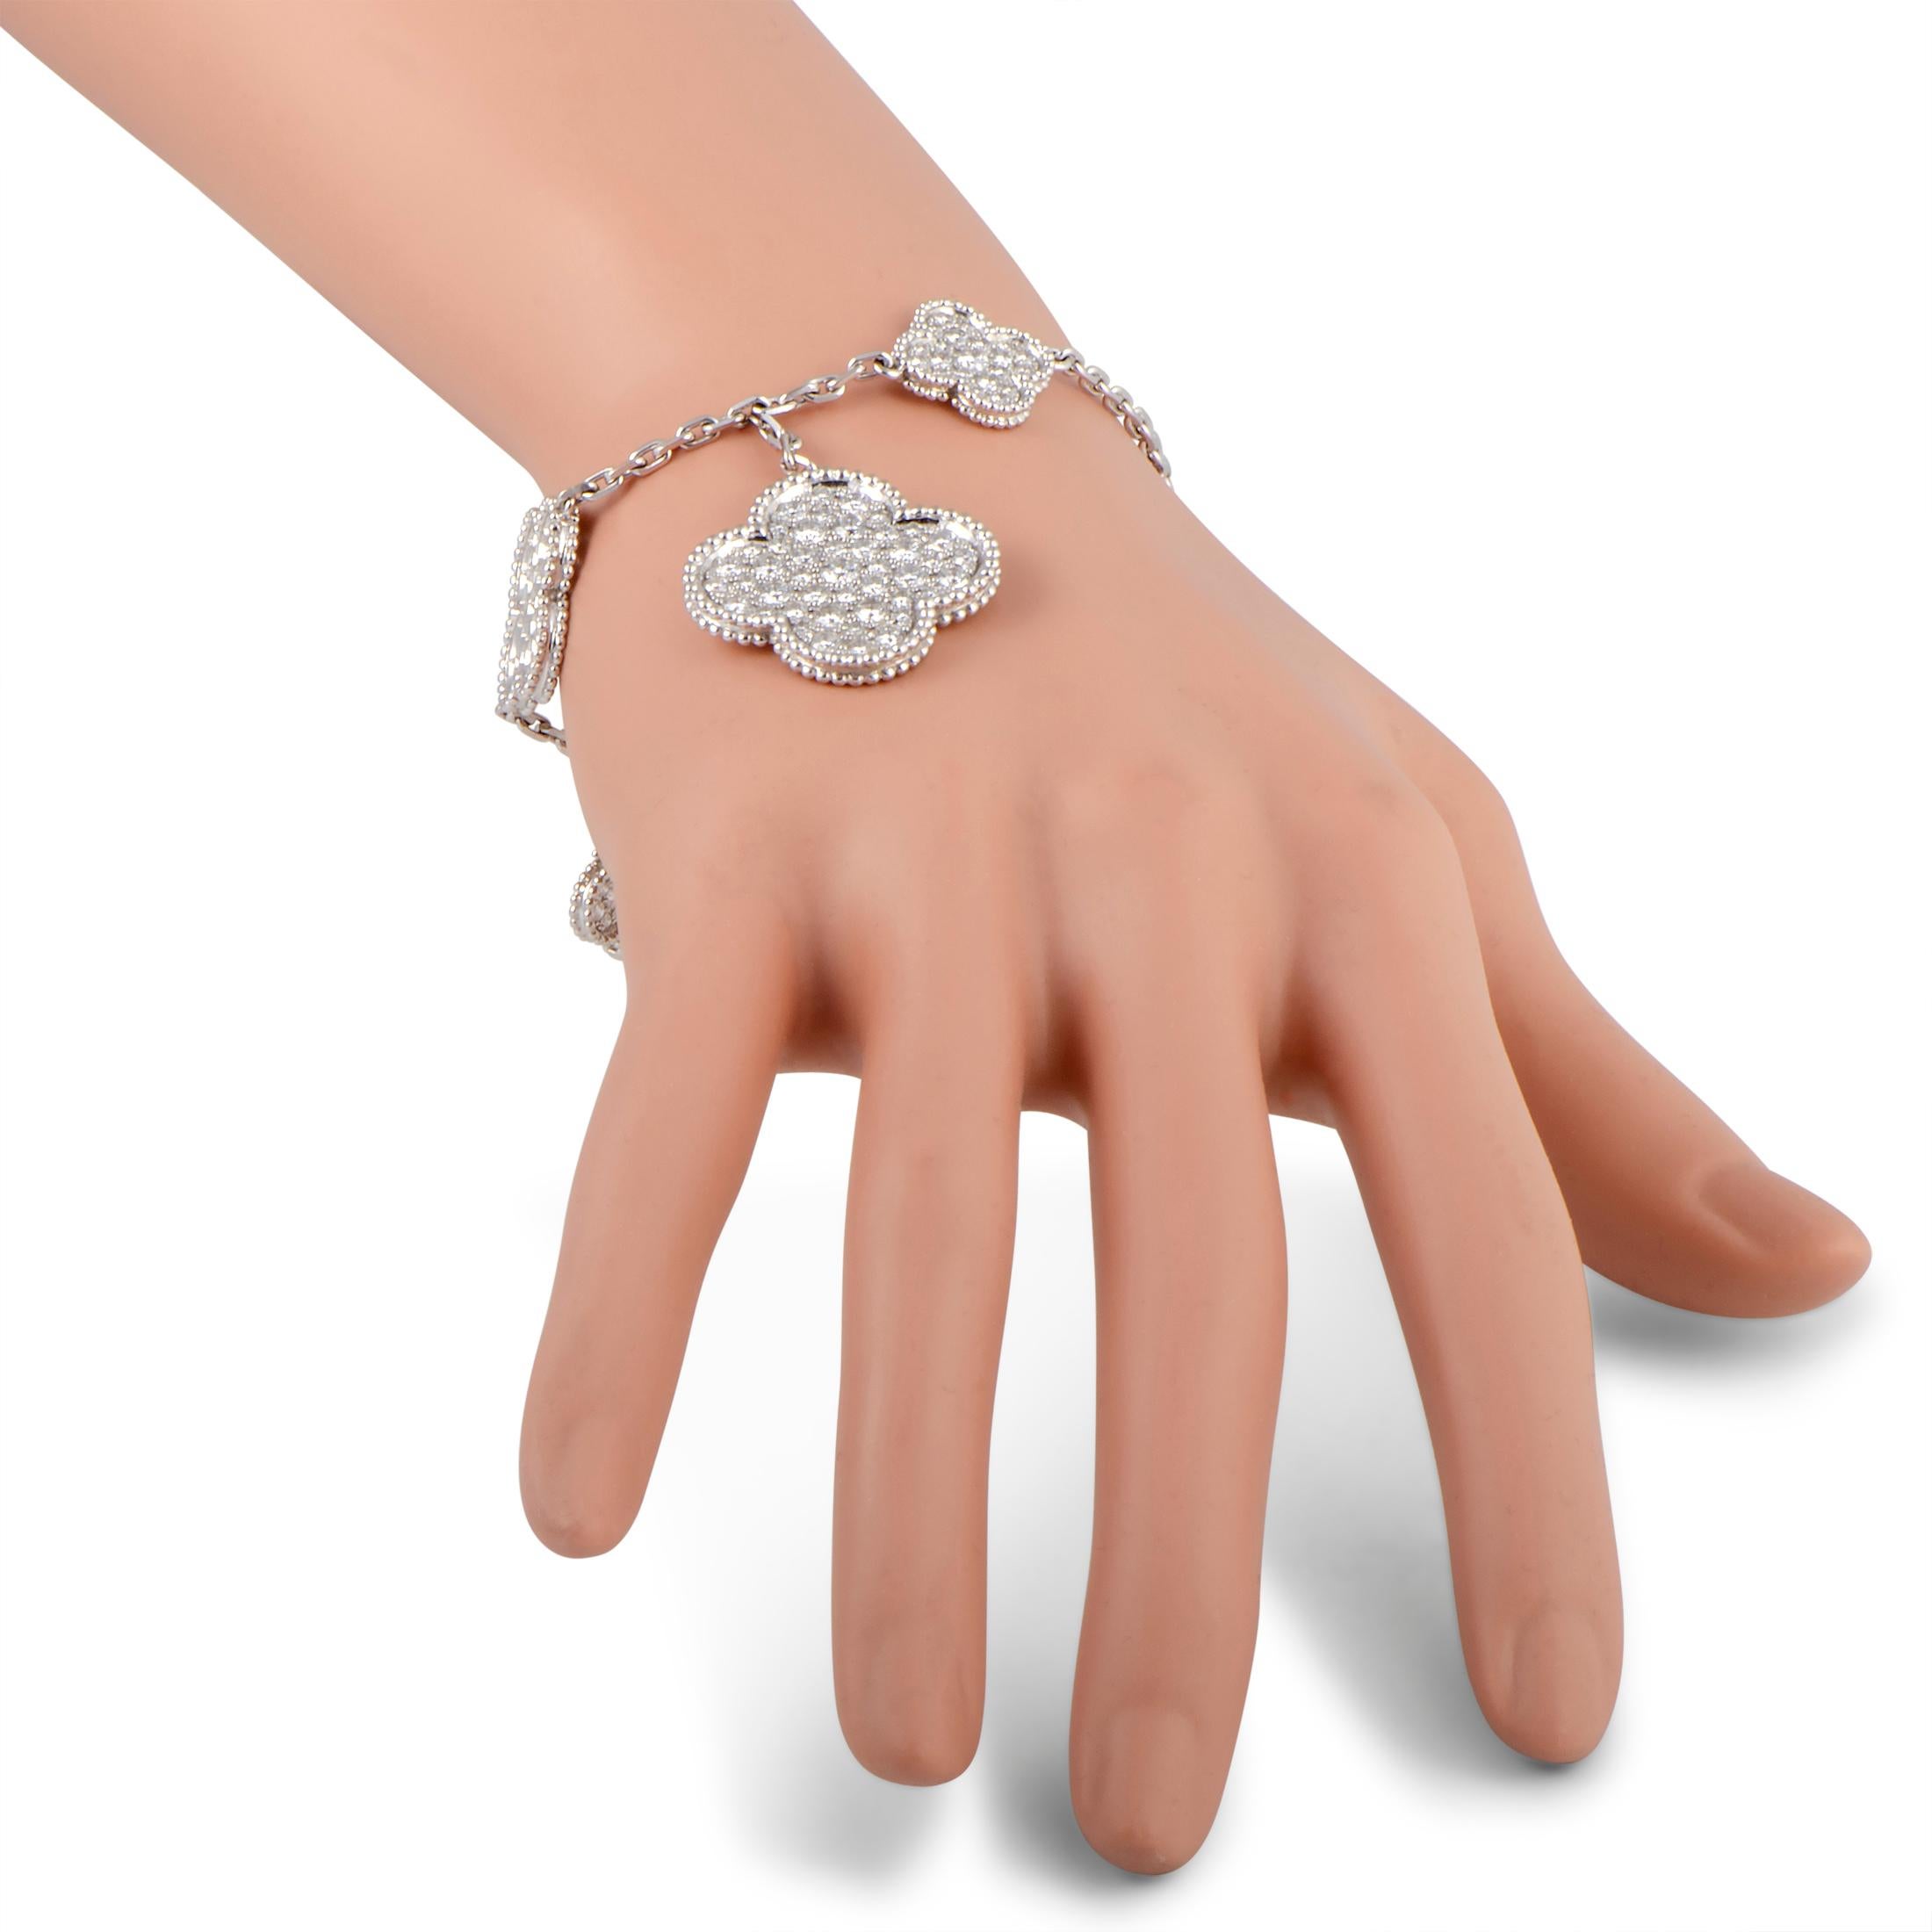 The Van Cleef & Arpels “Magic Alhambra” bracelet is made of 18K white gold and weighs 22.7 grams, measuring 6.50” in length. The bracelet is set with a total of 5.64 carats of diamonds that boast EF color and VVS clarity.

This jewelry piece is